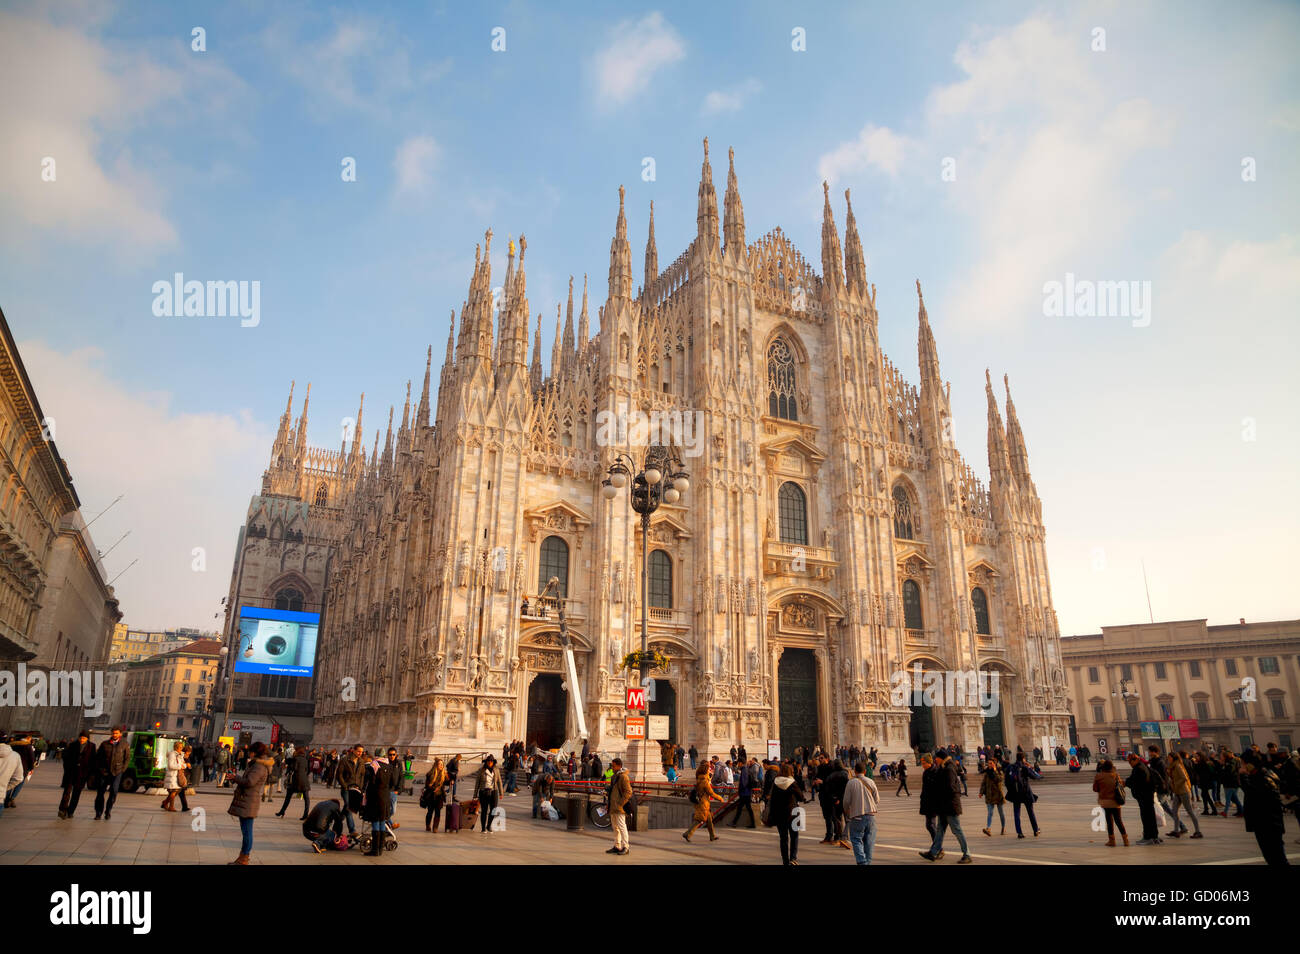 MILAN, ITALY - NOVEMBER 25: Duomo cathedral with people on November 25, 2015 in Milan, Italy. Stock Photo